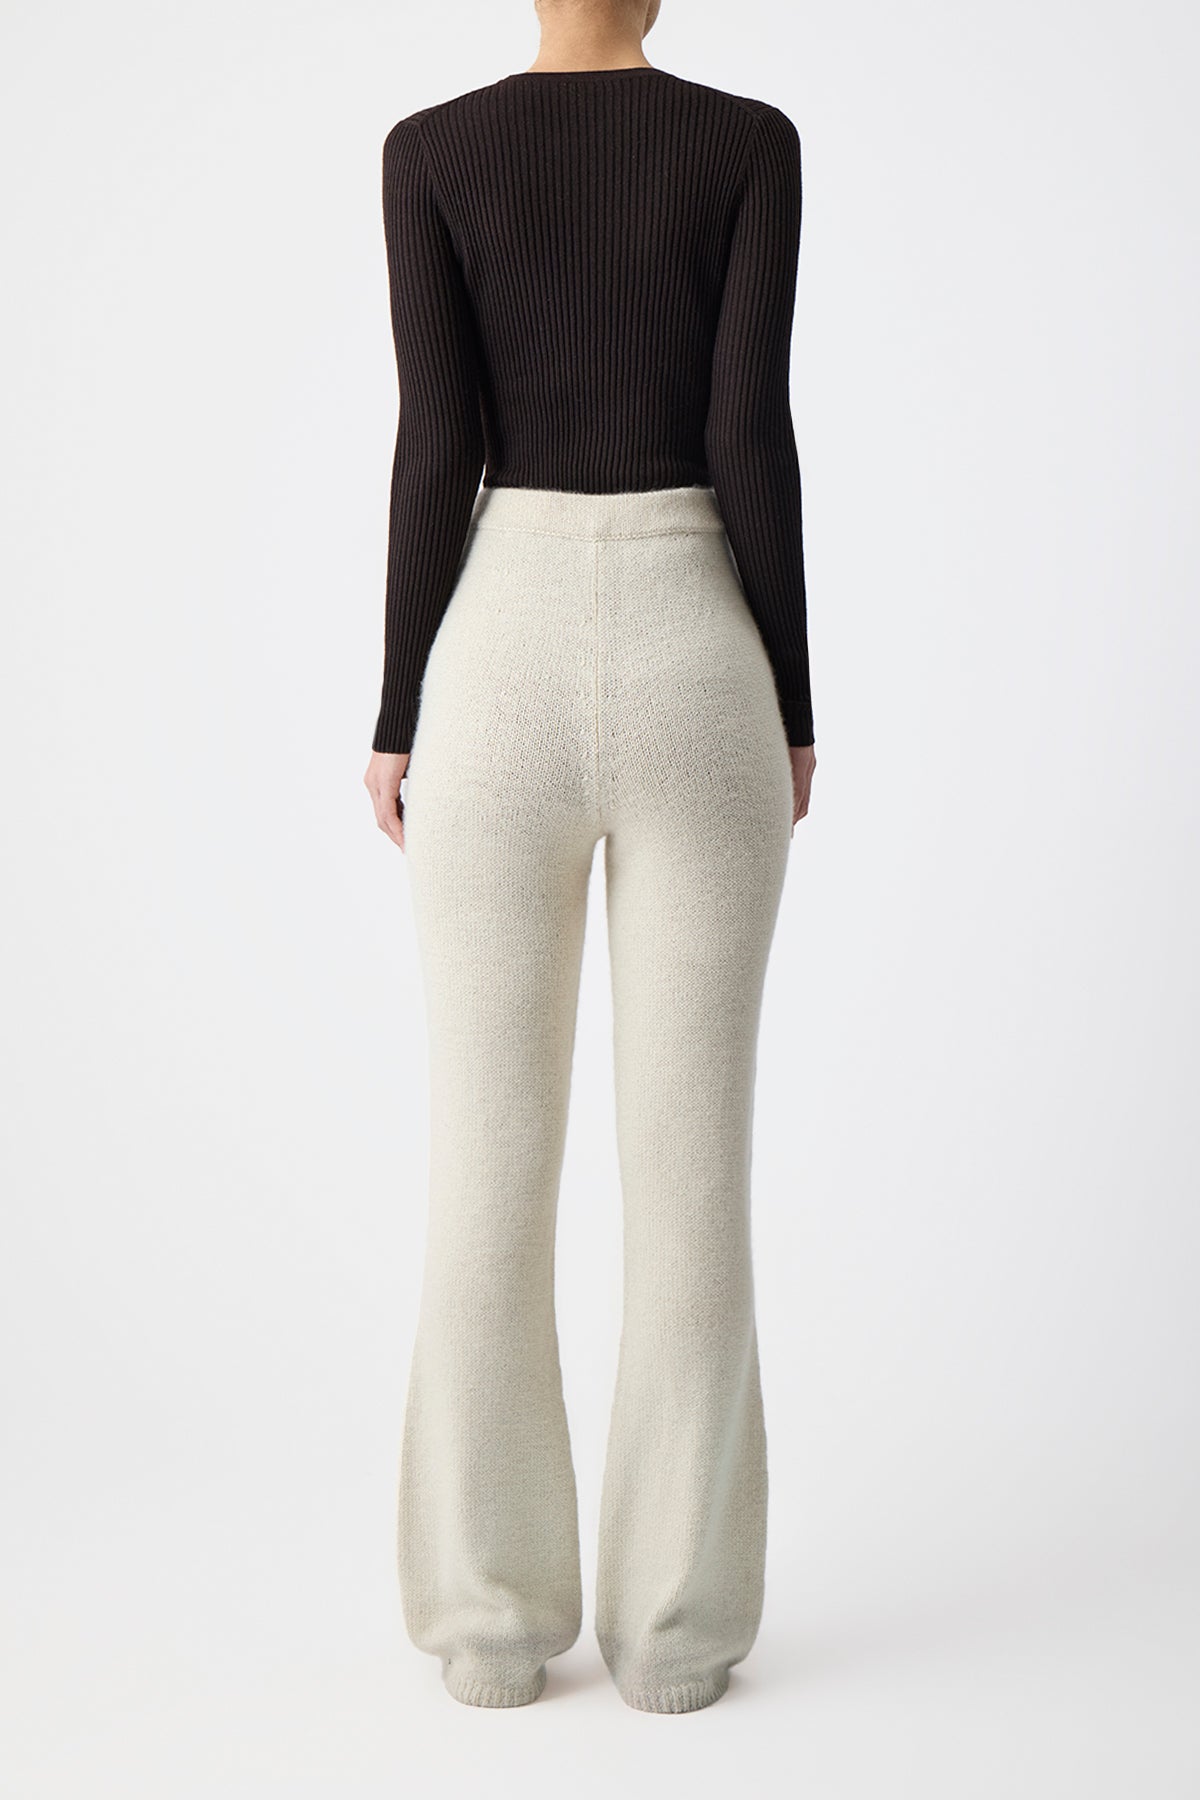 Ornston Knit Pant in Ivory Cashmere